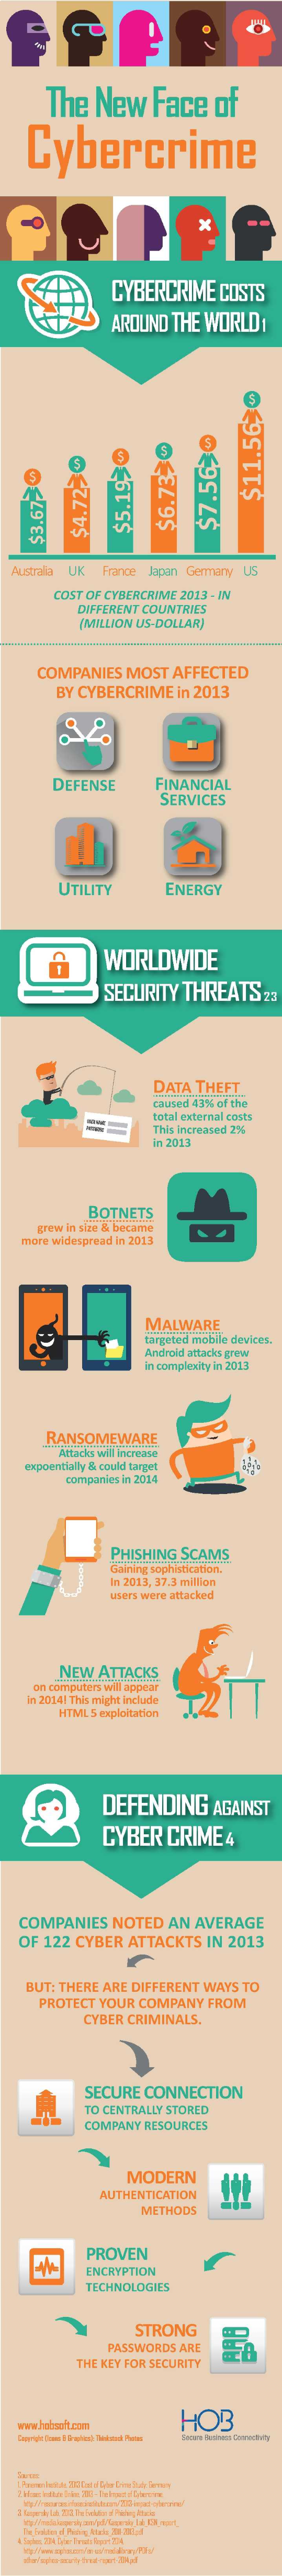 New Face of Cybercrime Infographic_001